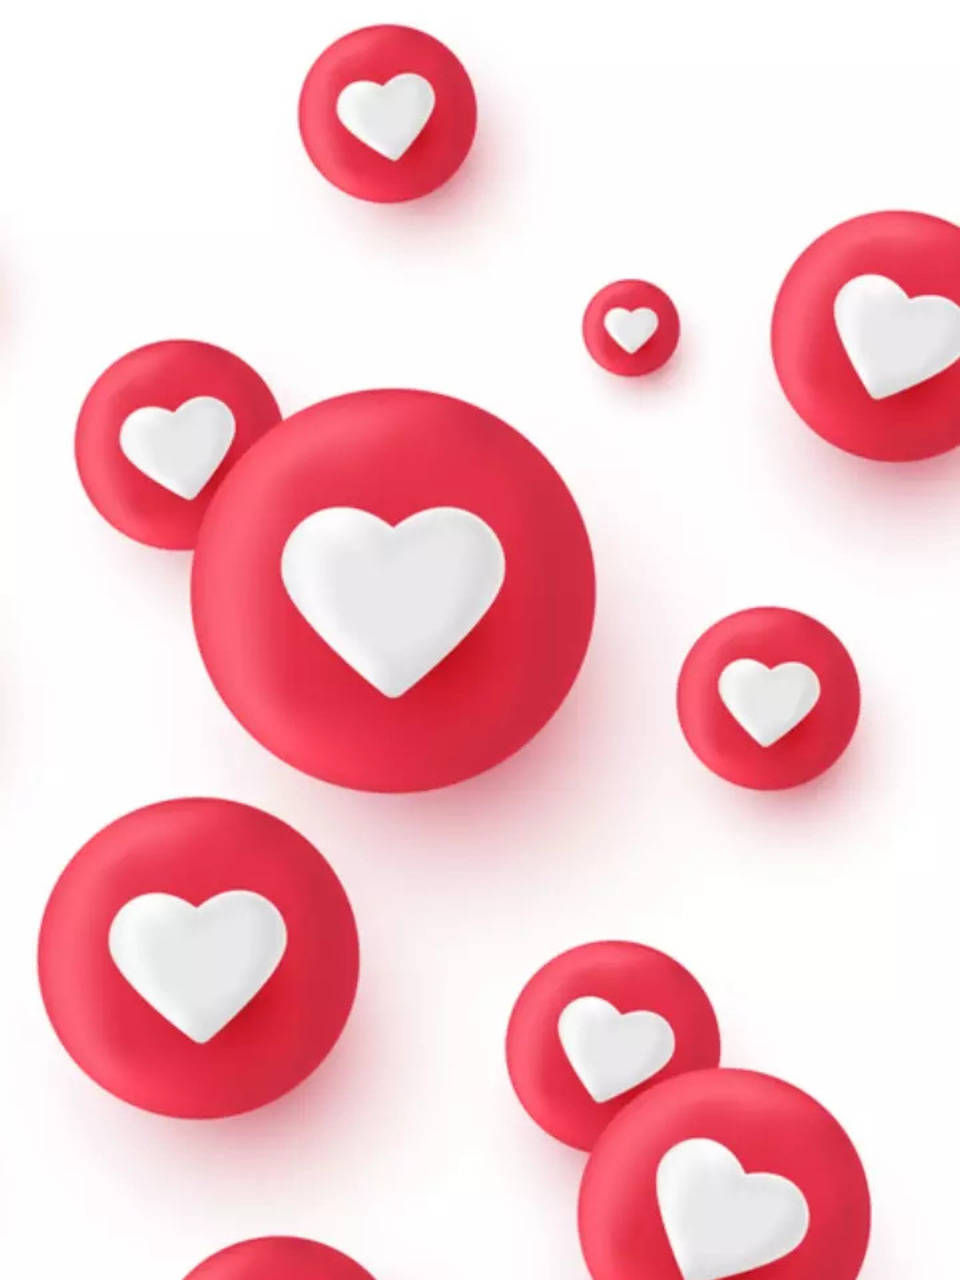 True meanings of different heart emojis | Times of India